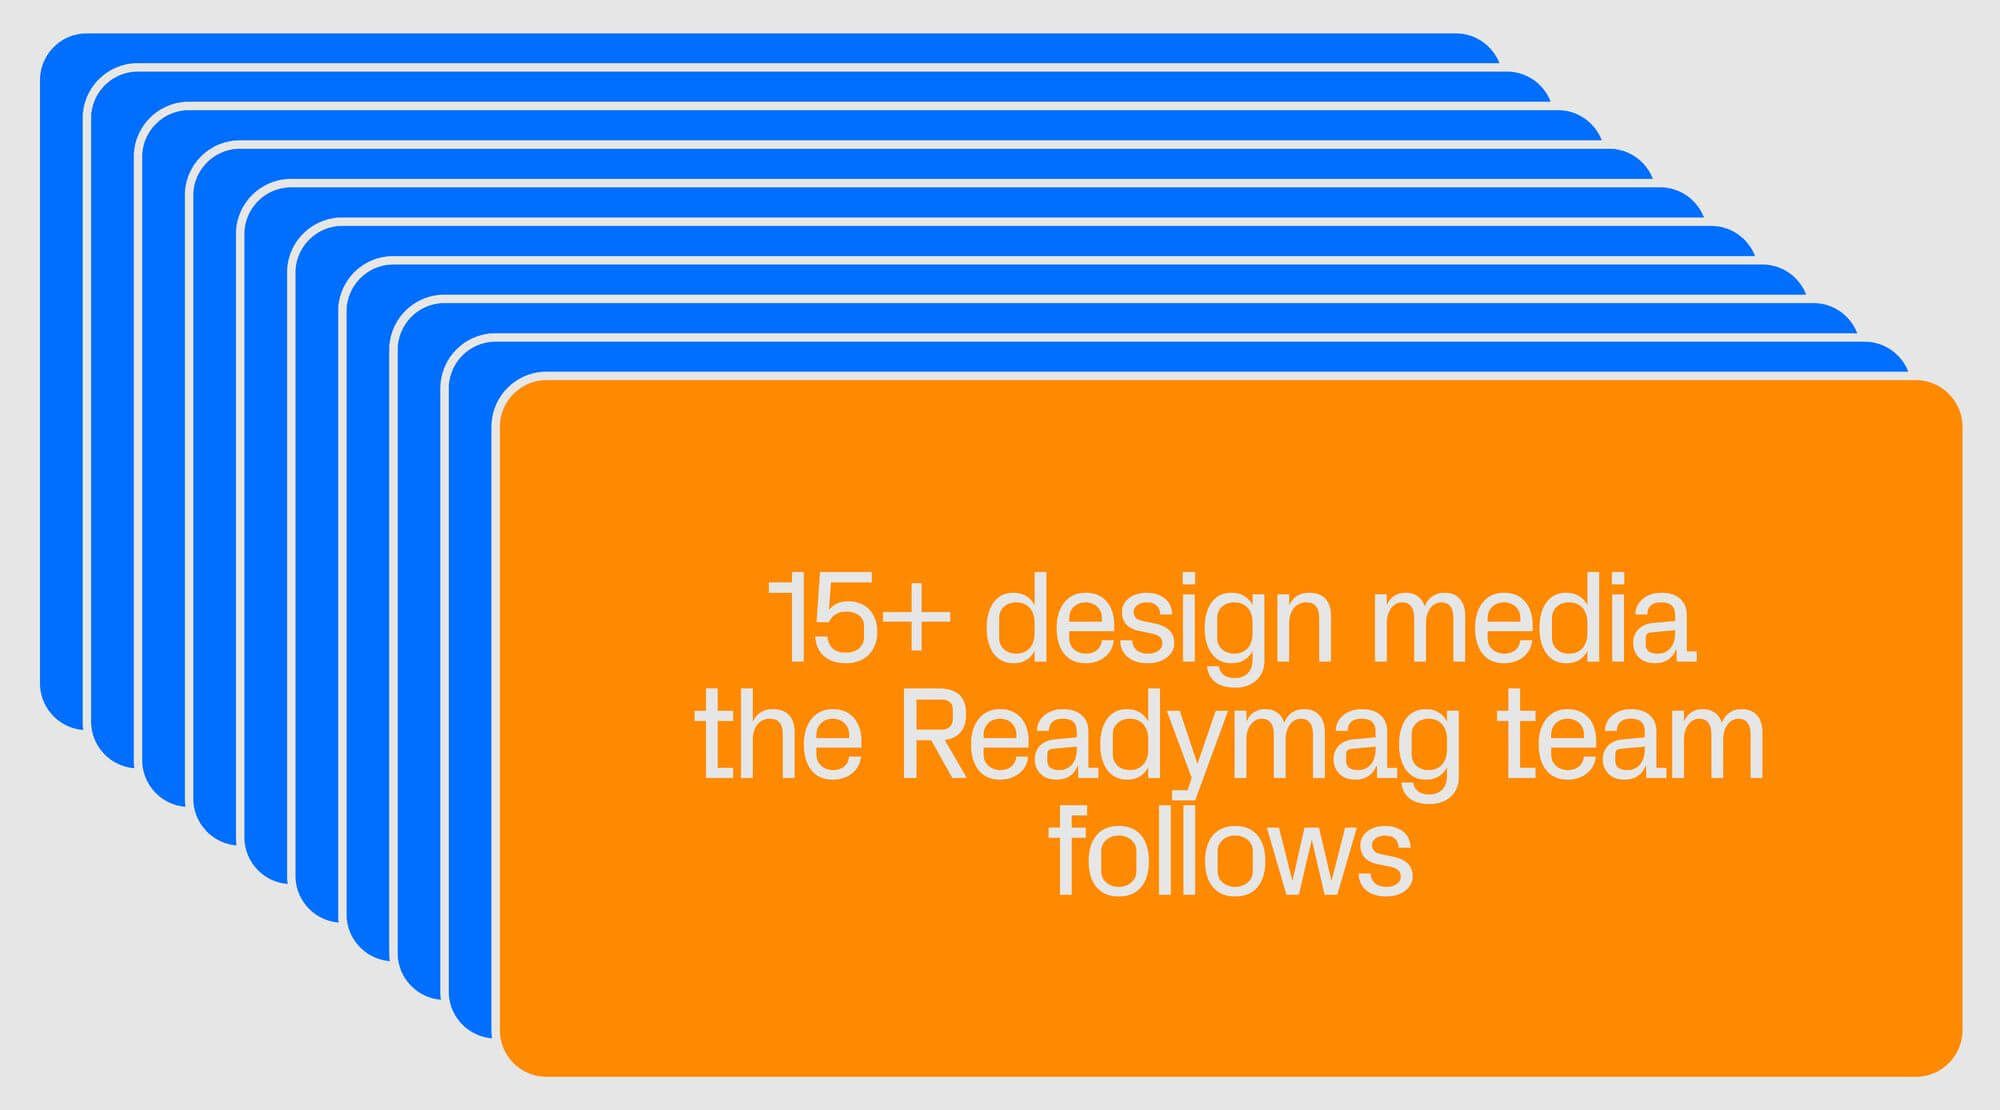 Readymag blog Top design media and blogs to keep you educated & inspired